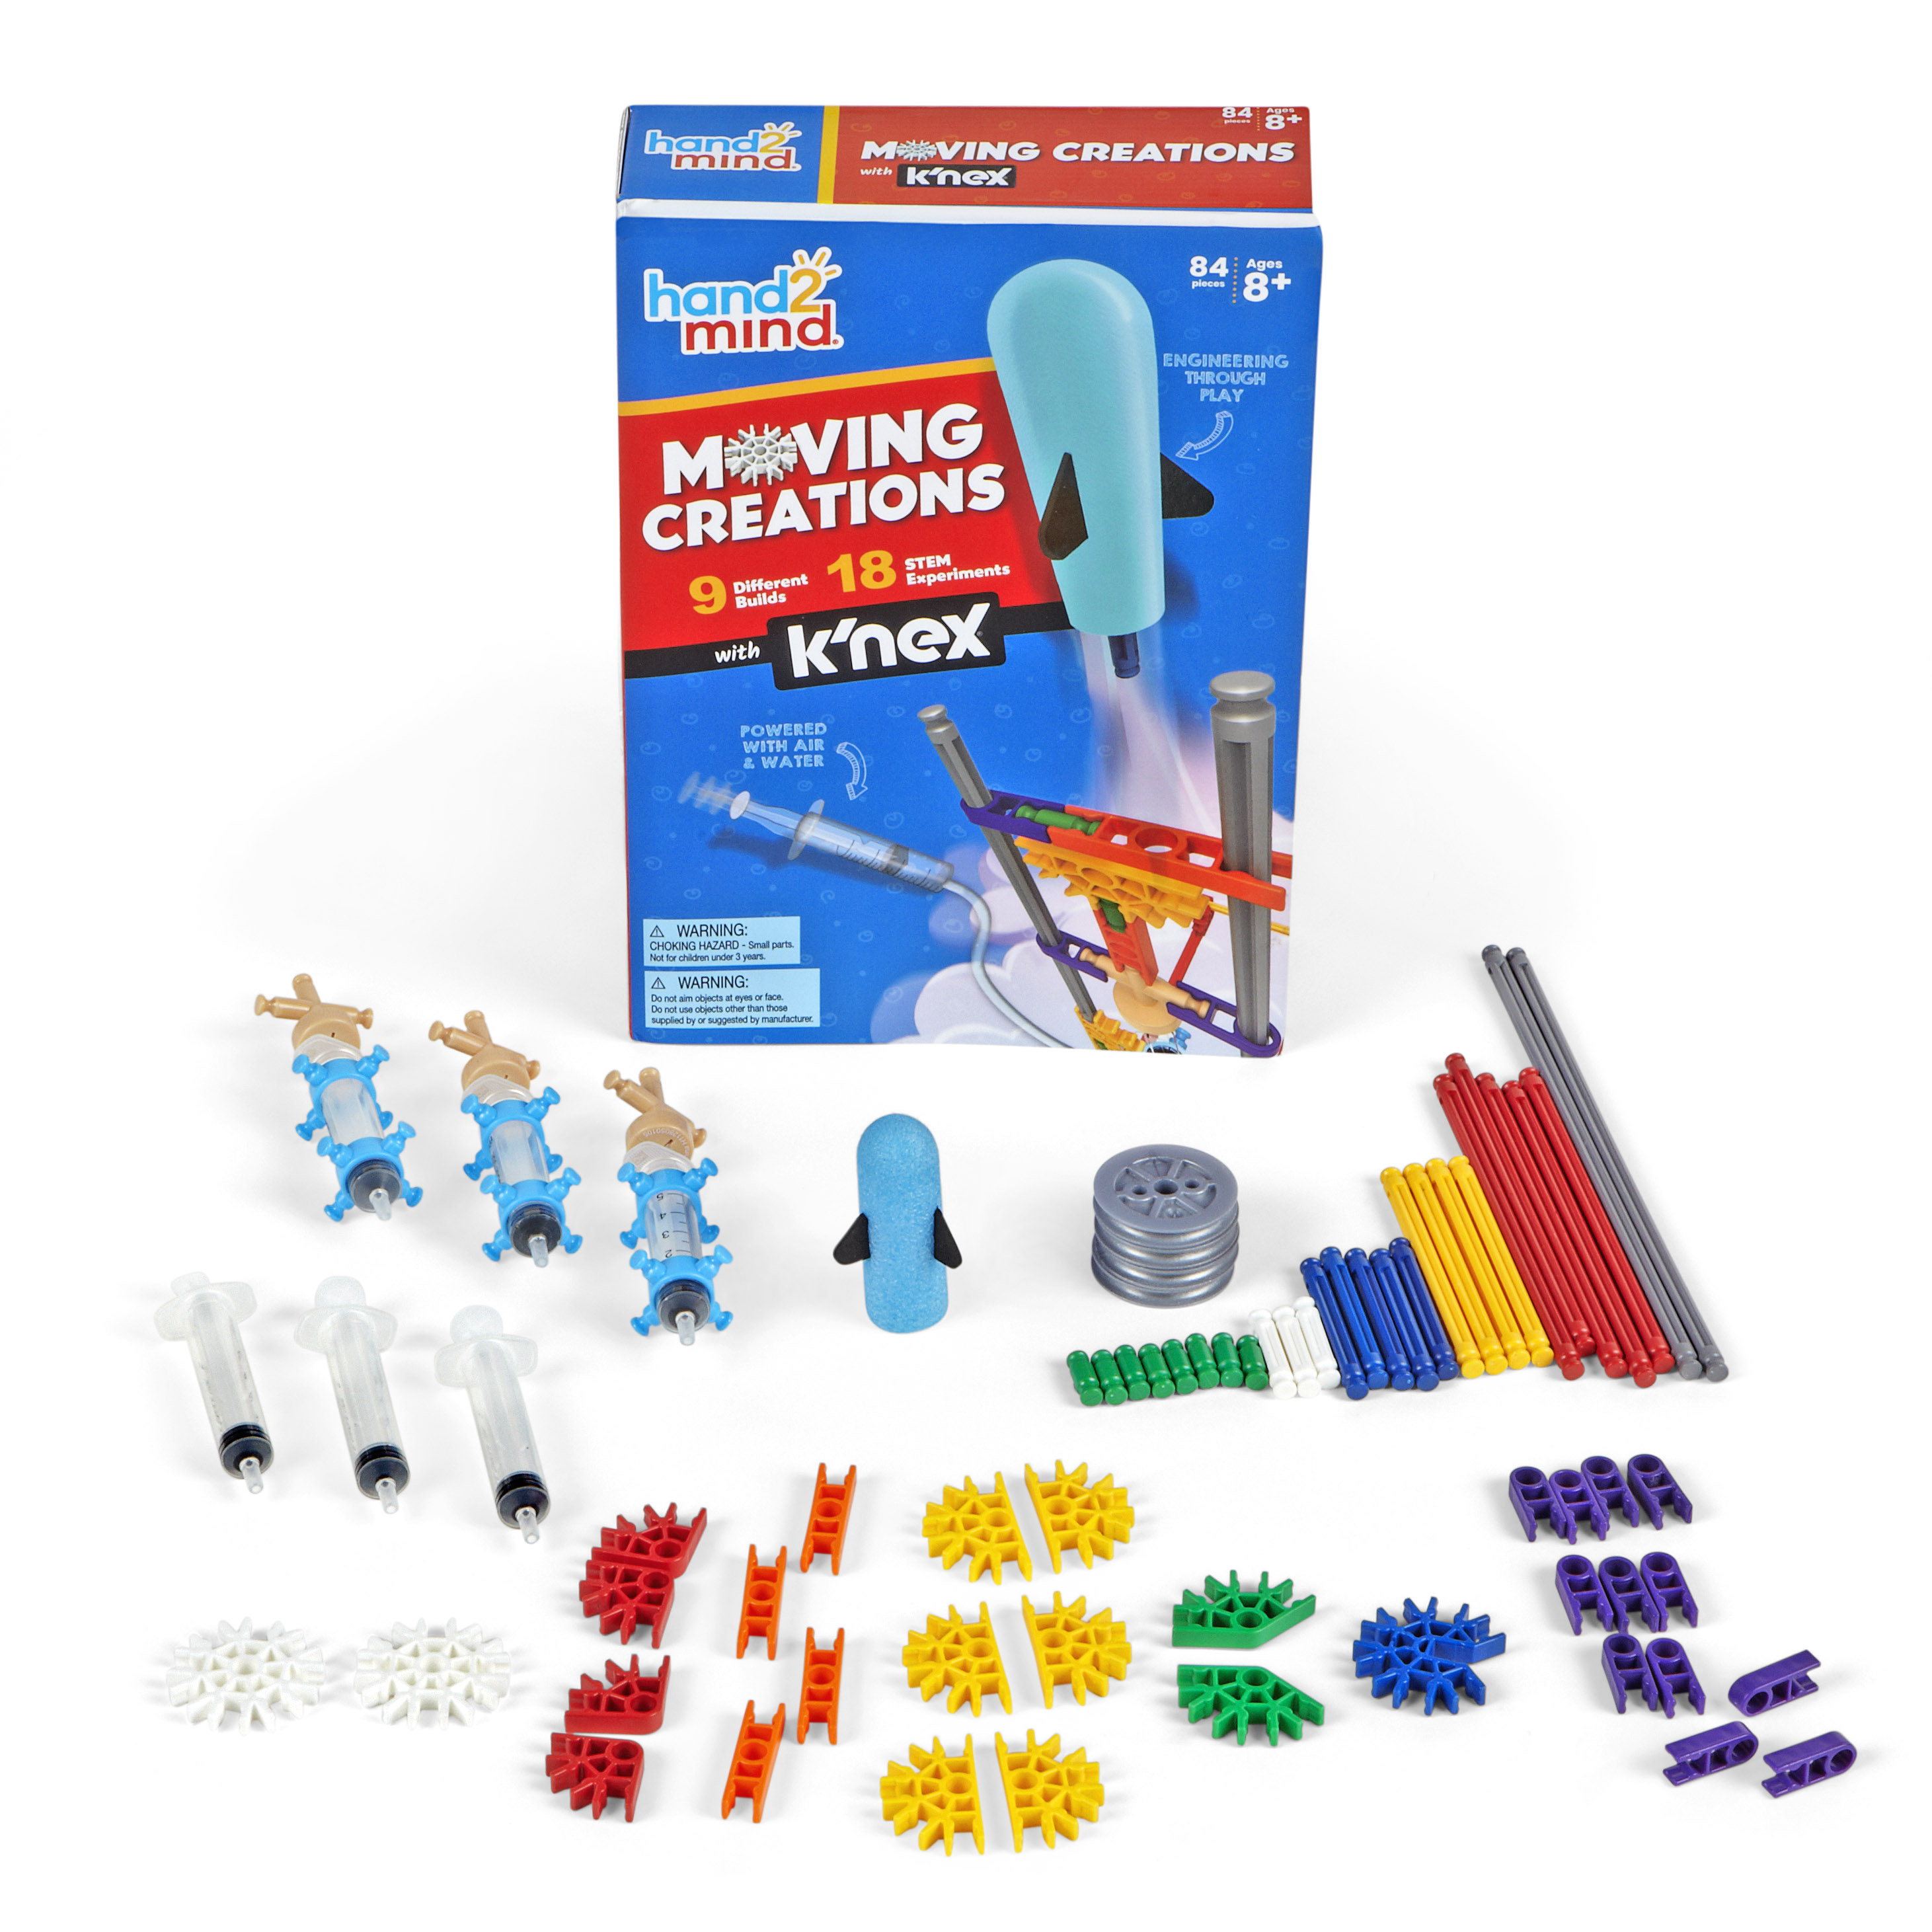 Moving Creations with k’nex